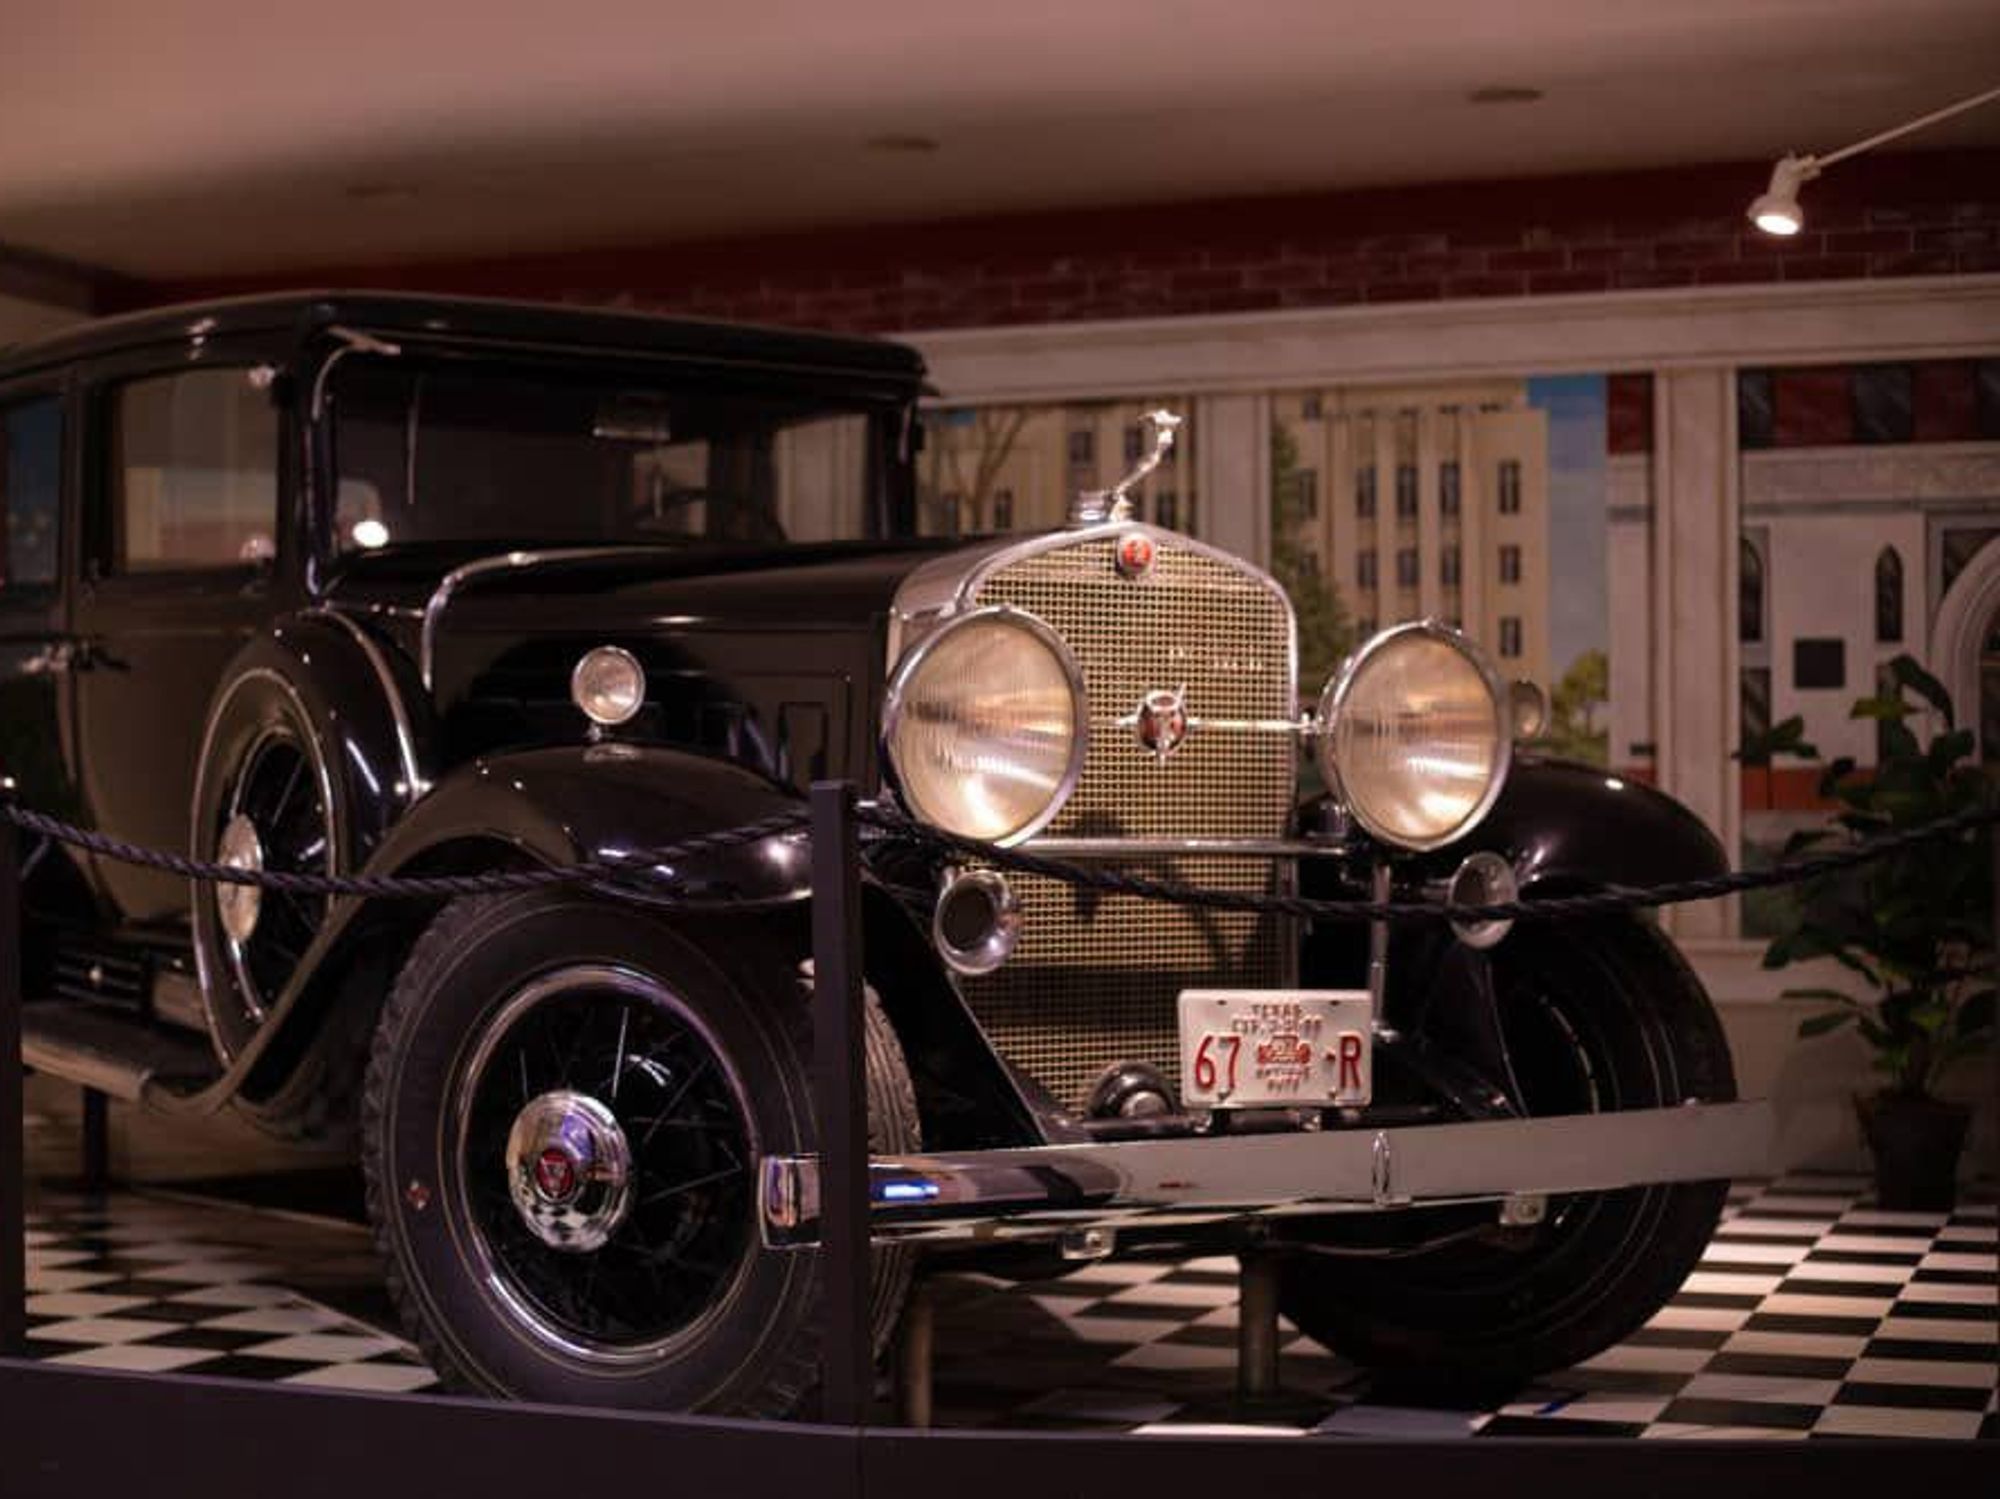 See incredible vintage automobiles in the museum's transportation collection.